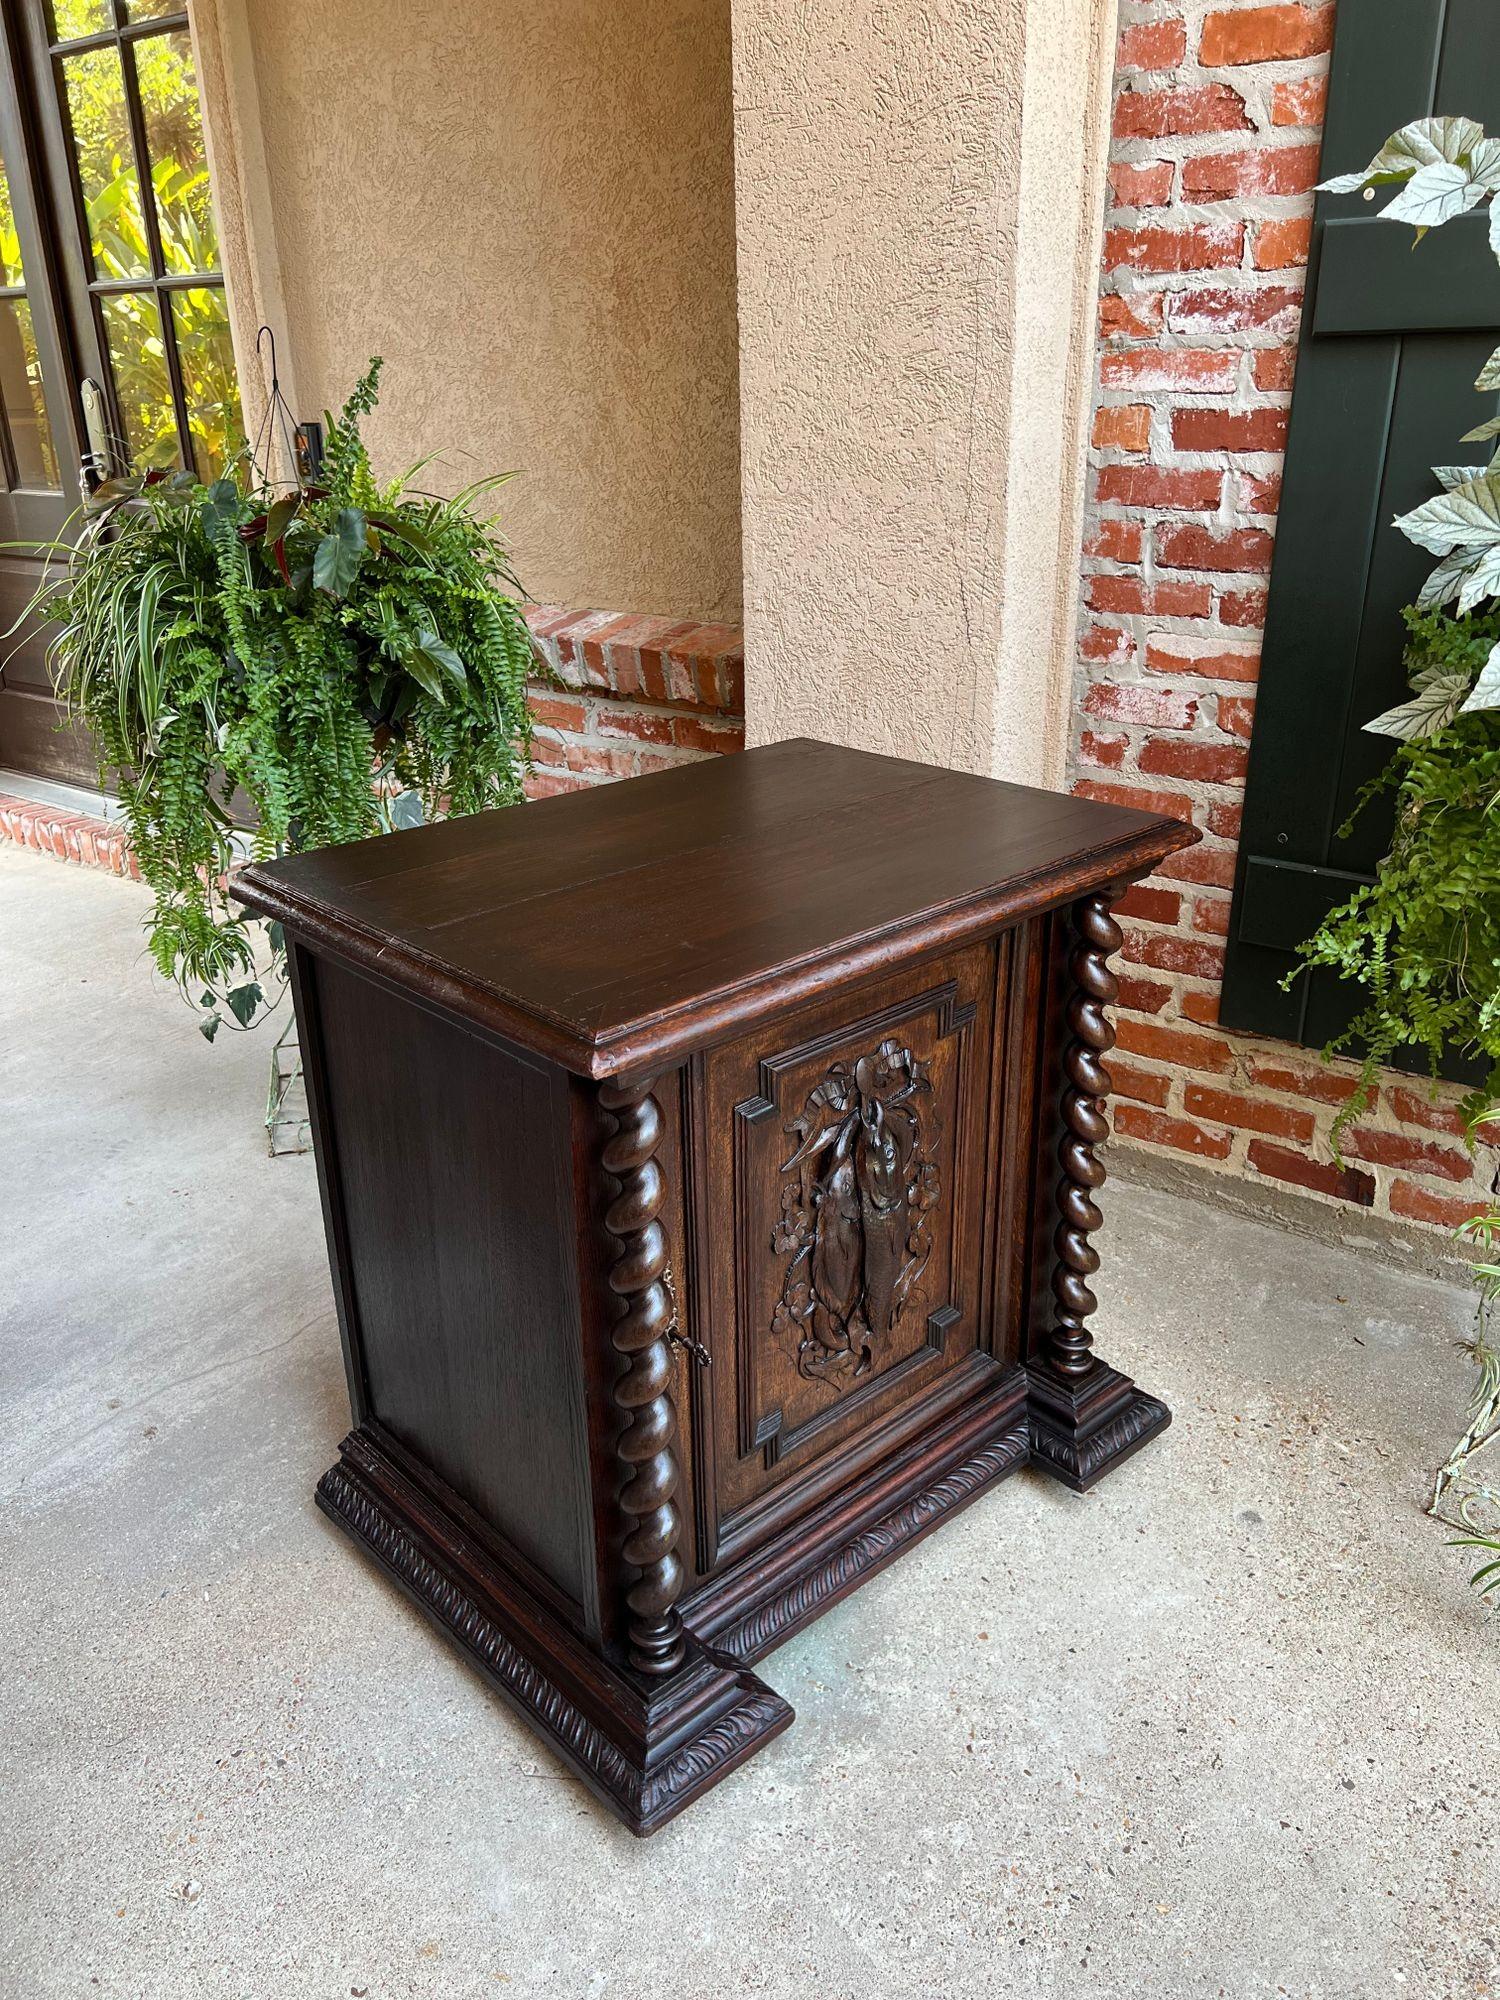 French Provincial 19th Century French Cabinet Barley Twist Black Forest Wine Bar Carved Oak Fish